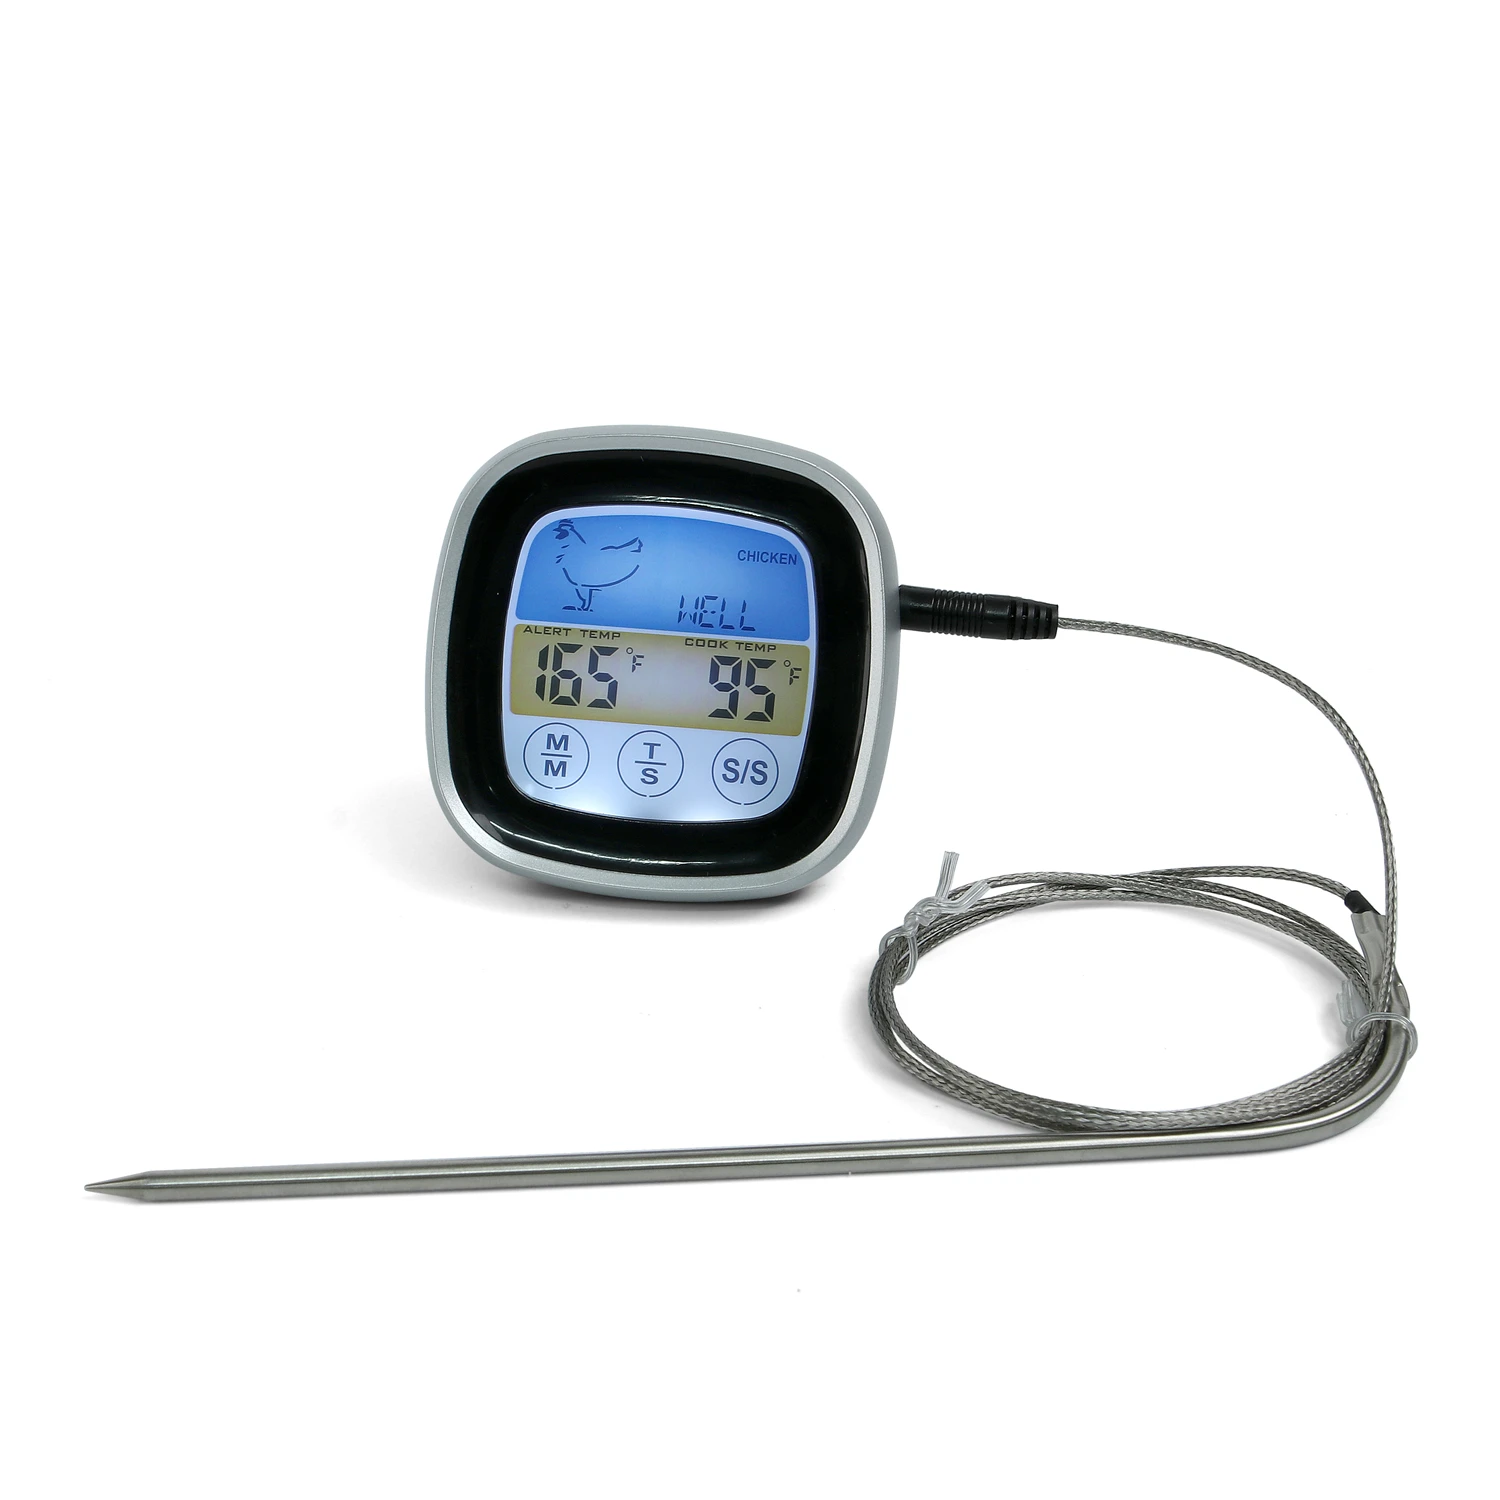 Digital Meat Thermometer Colorful Screen with Backlight Both for Kitchen and Outdoor Meat Thermometer